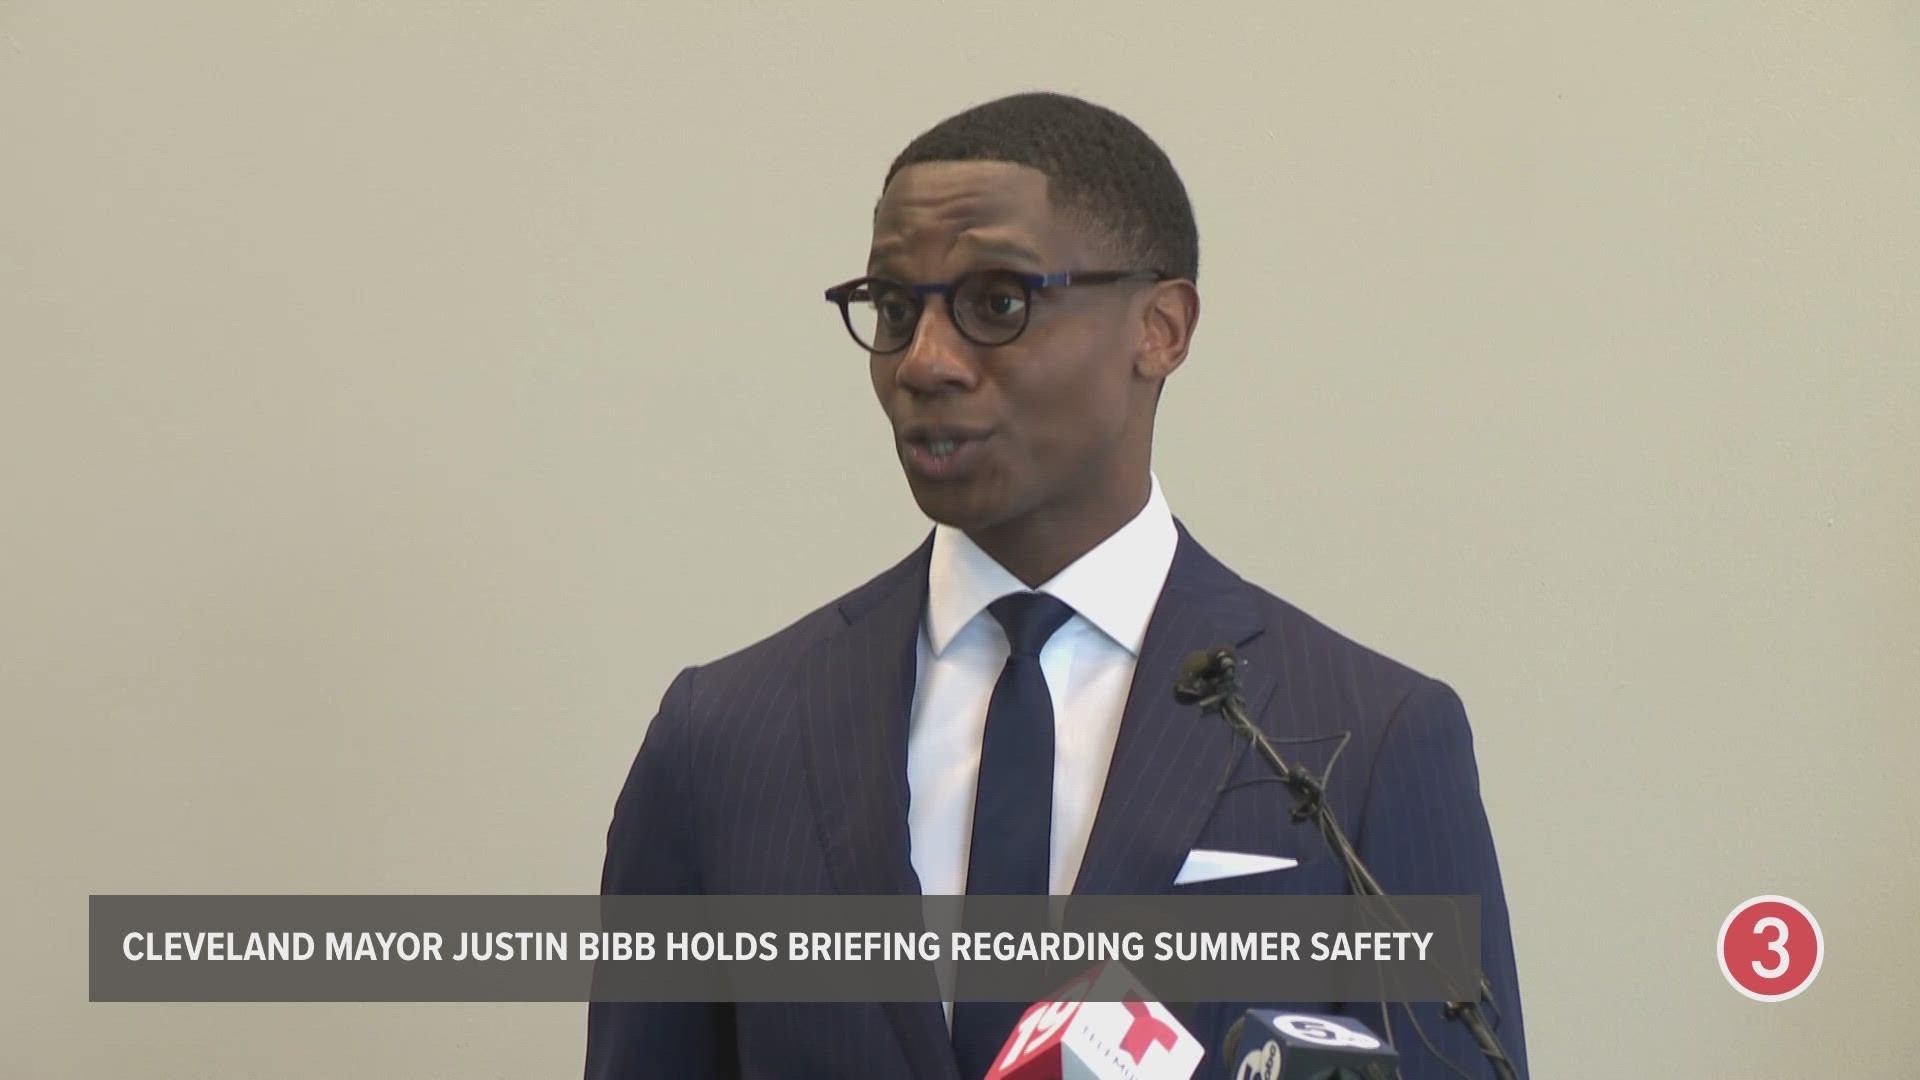 Cleveland Mayor Justin Bibb was joined by officials to give an update on safety in the city ahead of the upcoming summer months.